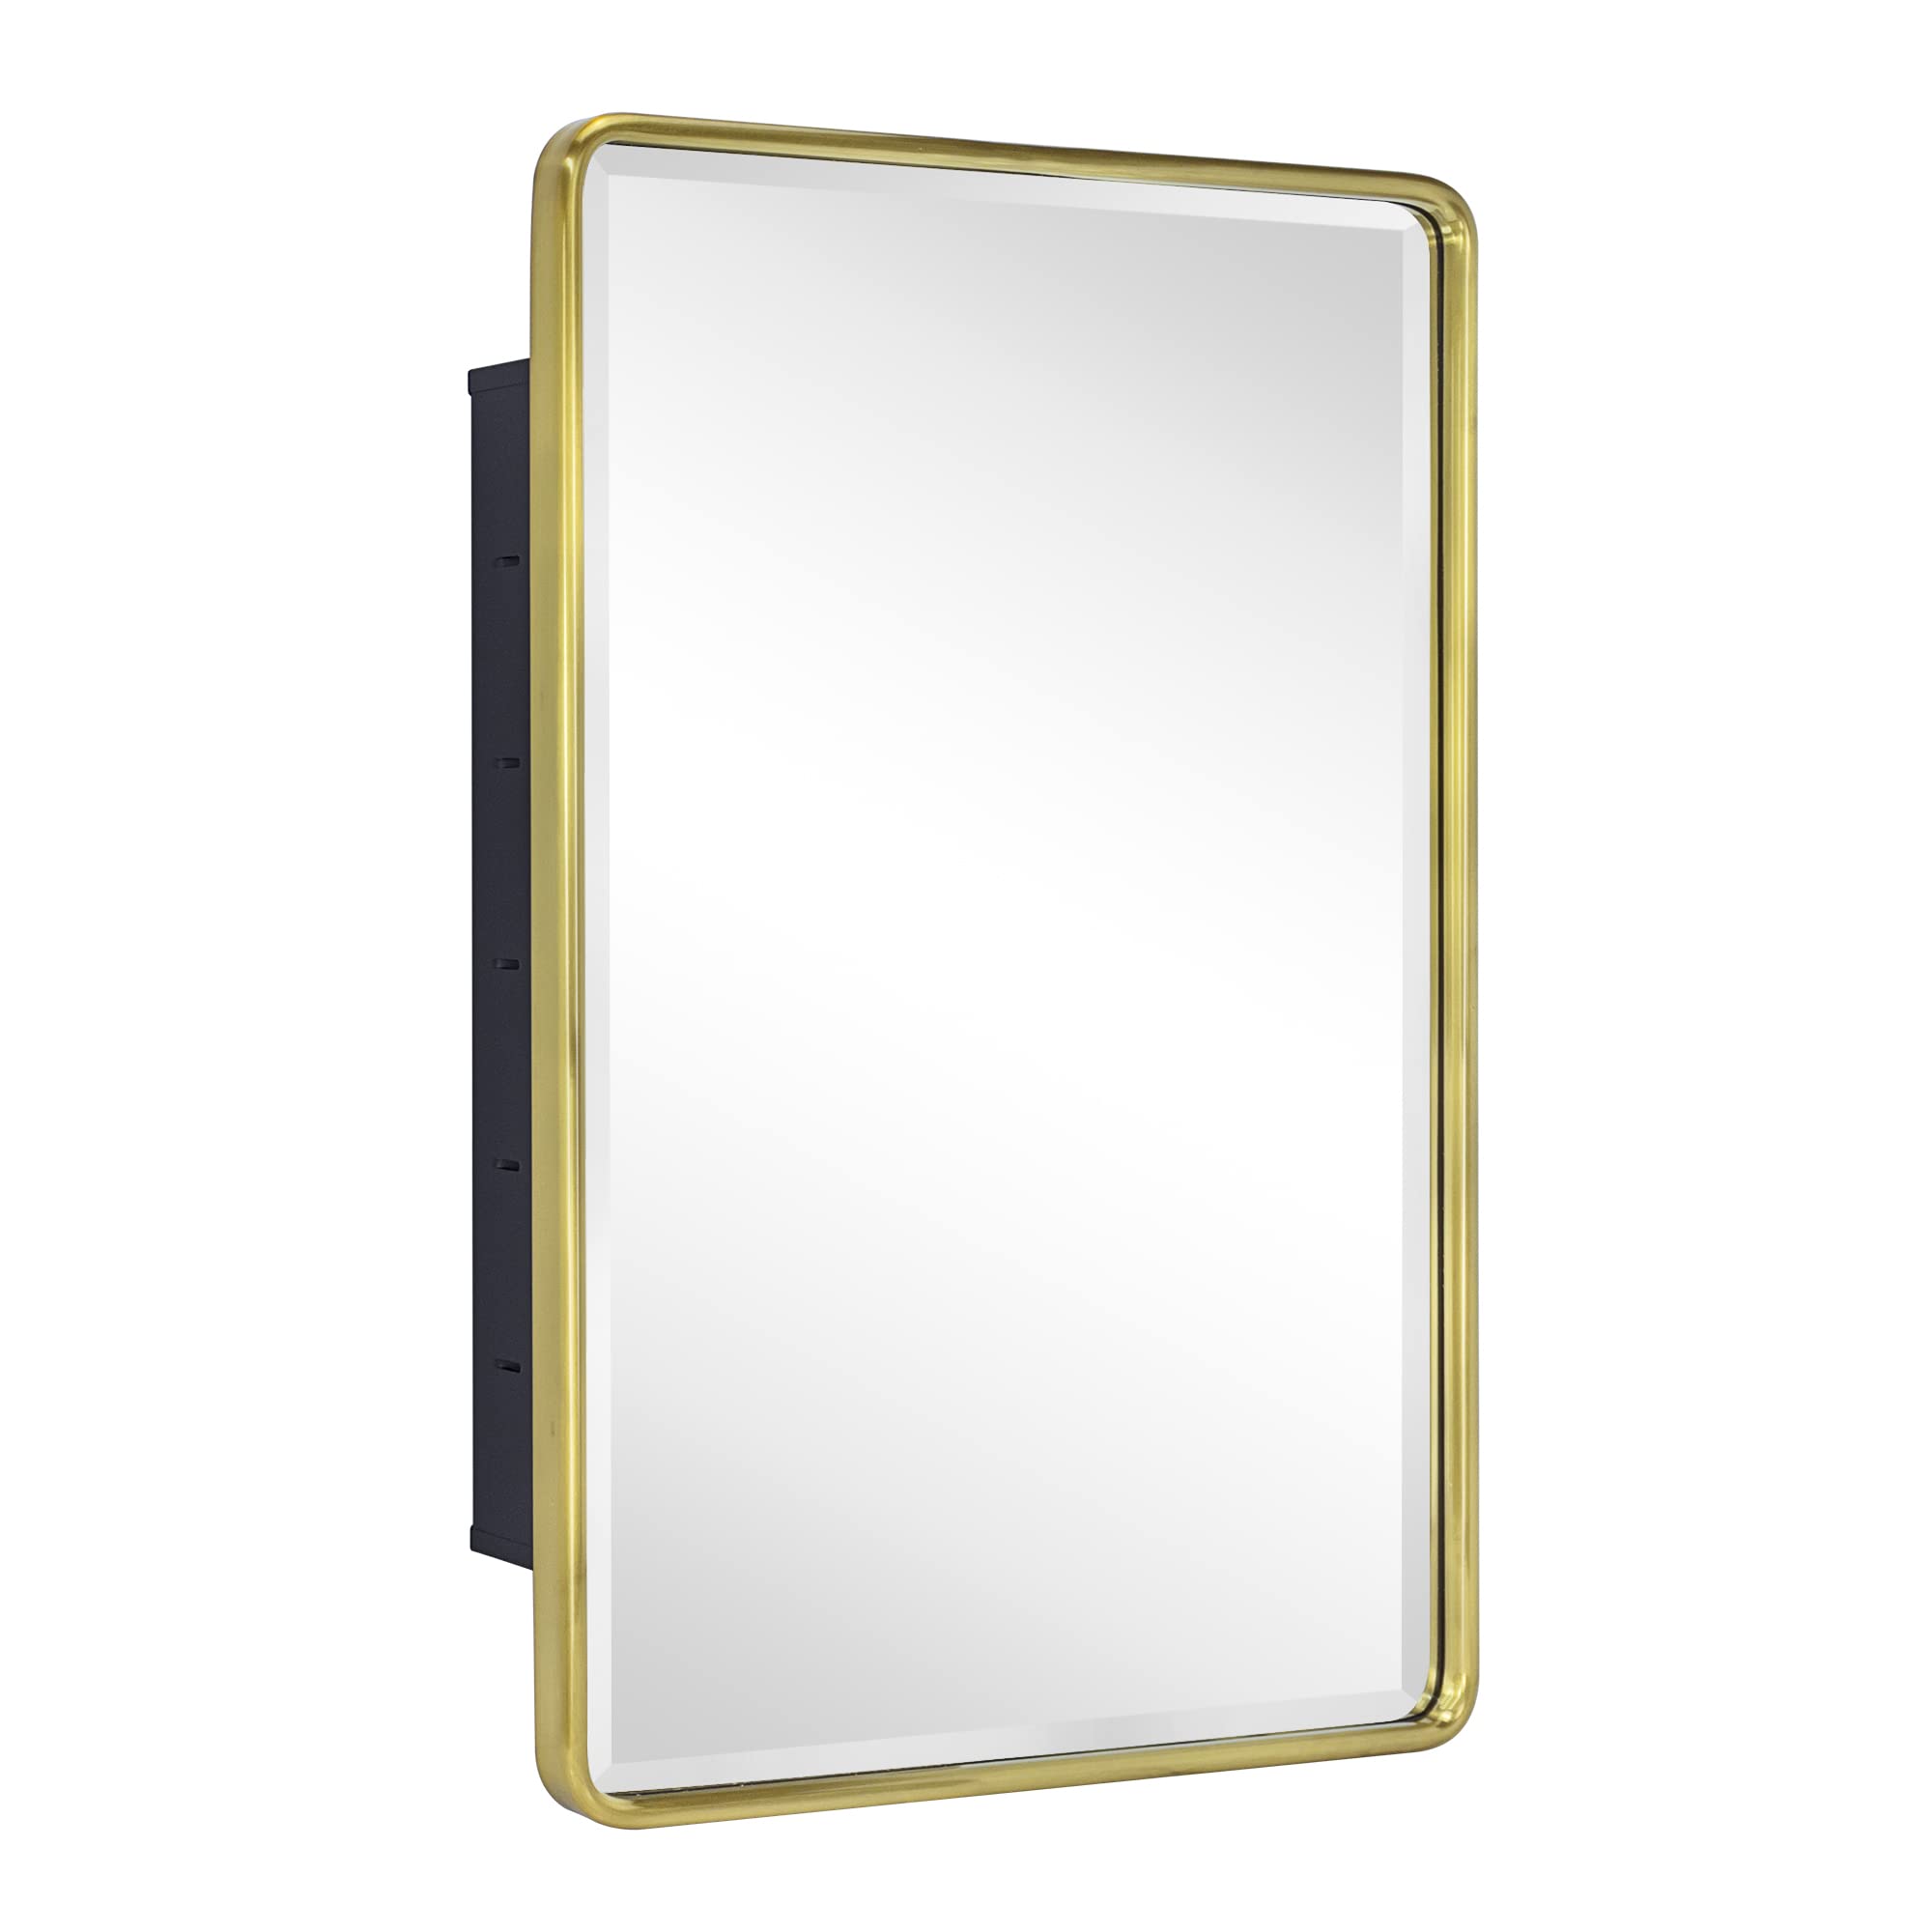 Farmhouse Recessed Metal Bathroom Medicine Cabinets with Mirror-16x24-Brushed Gold